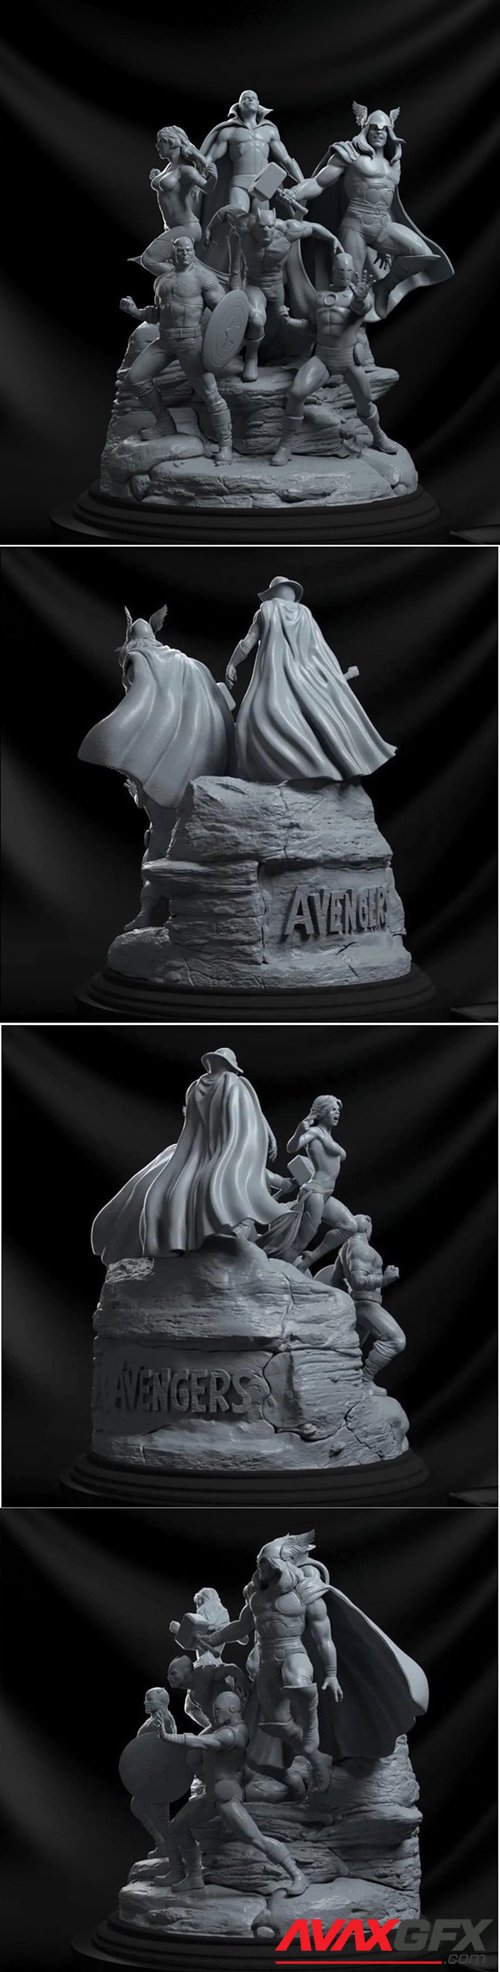 Avengers Washed Diorama – 3D Printable STL